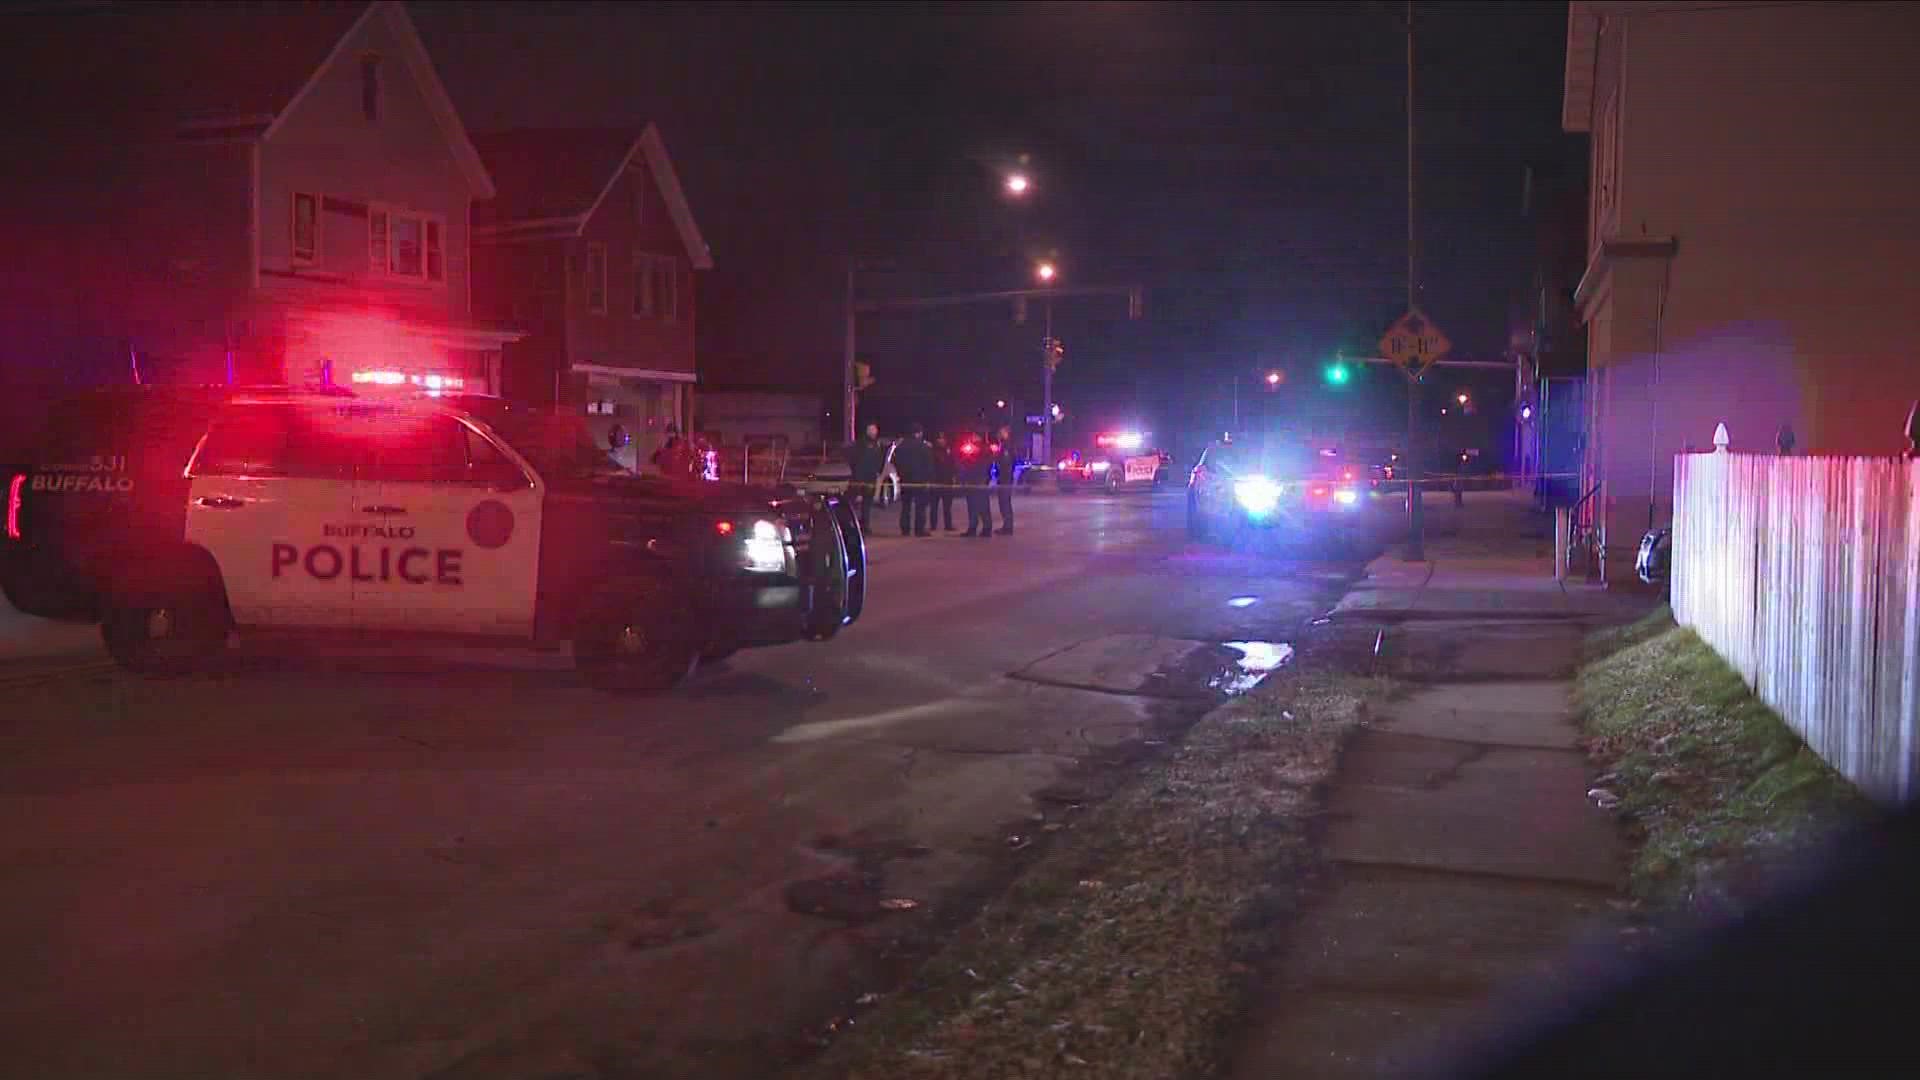 Teen in critical condition after shooting in Buffalo